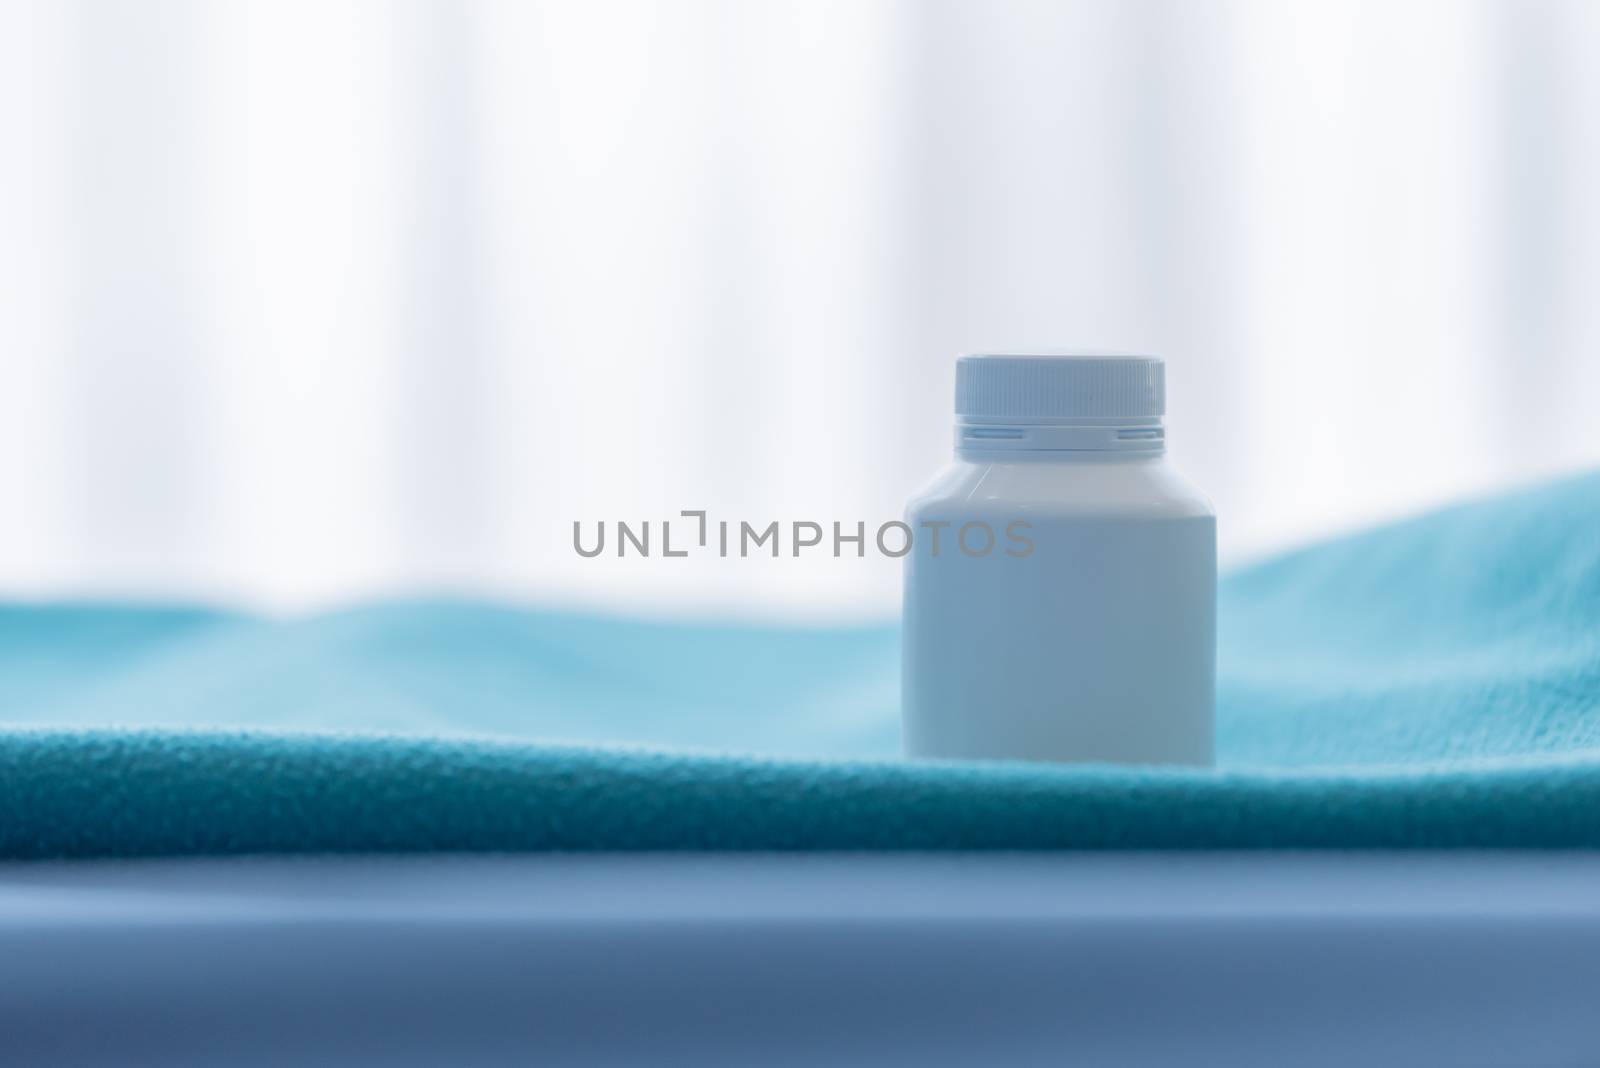 A white medicine bottle on the green bed sheet. by animagesdesign